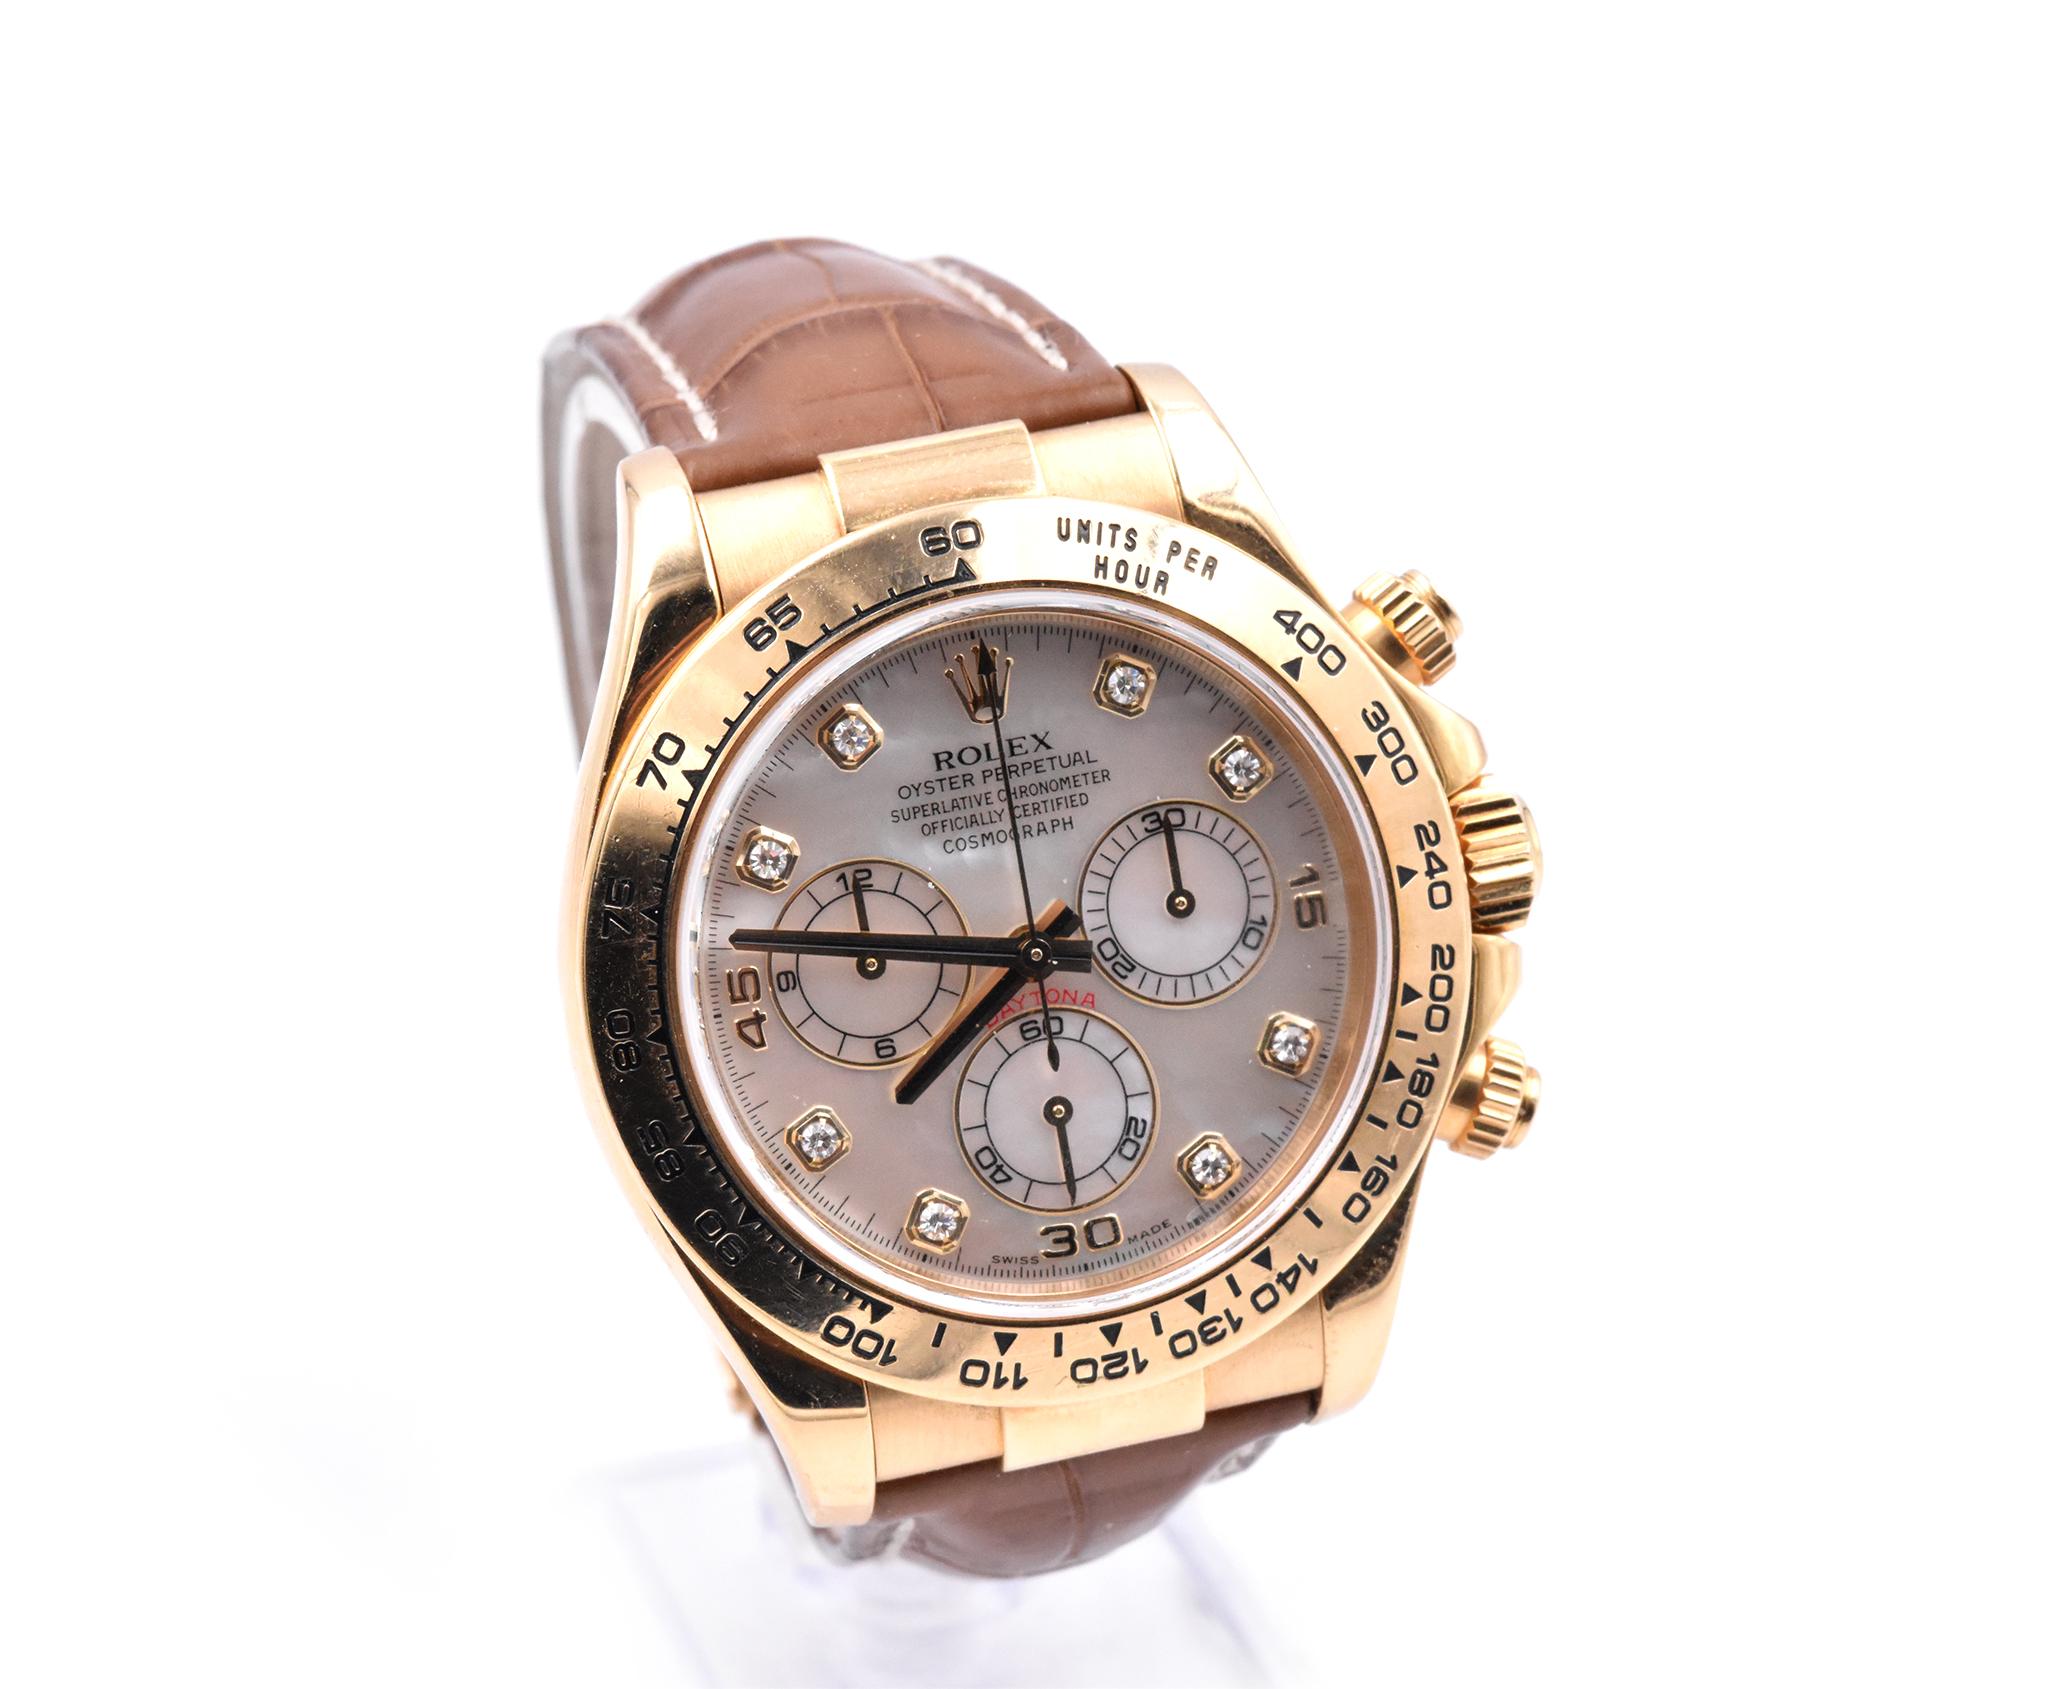 Movement: automatic 4130 movement
Function: hours, minutes, seconds, sub seconds, chronograph
Case: 18k yellow gold round 40mm case, tachymeter bezel, inner reflector ring engraved with serial number, sapphire crystal, screw-down crown and